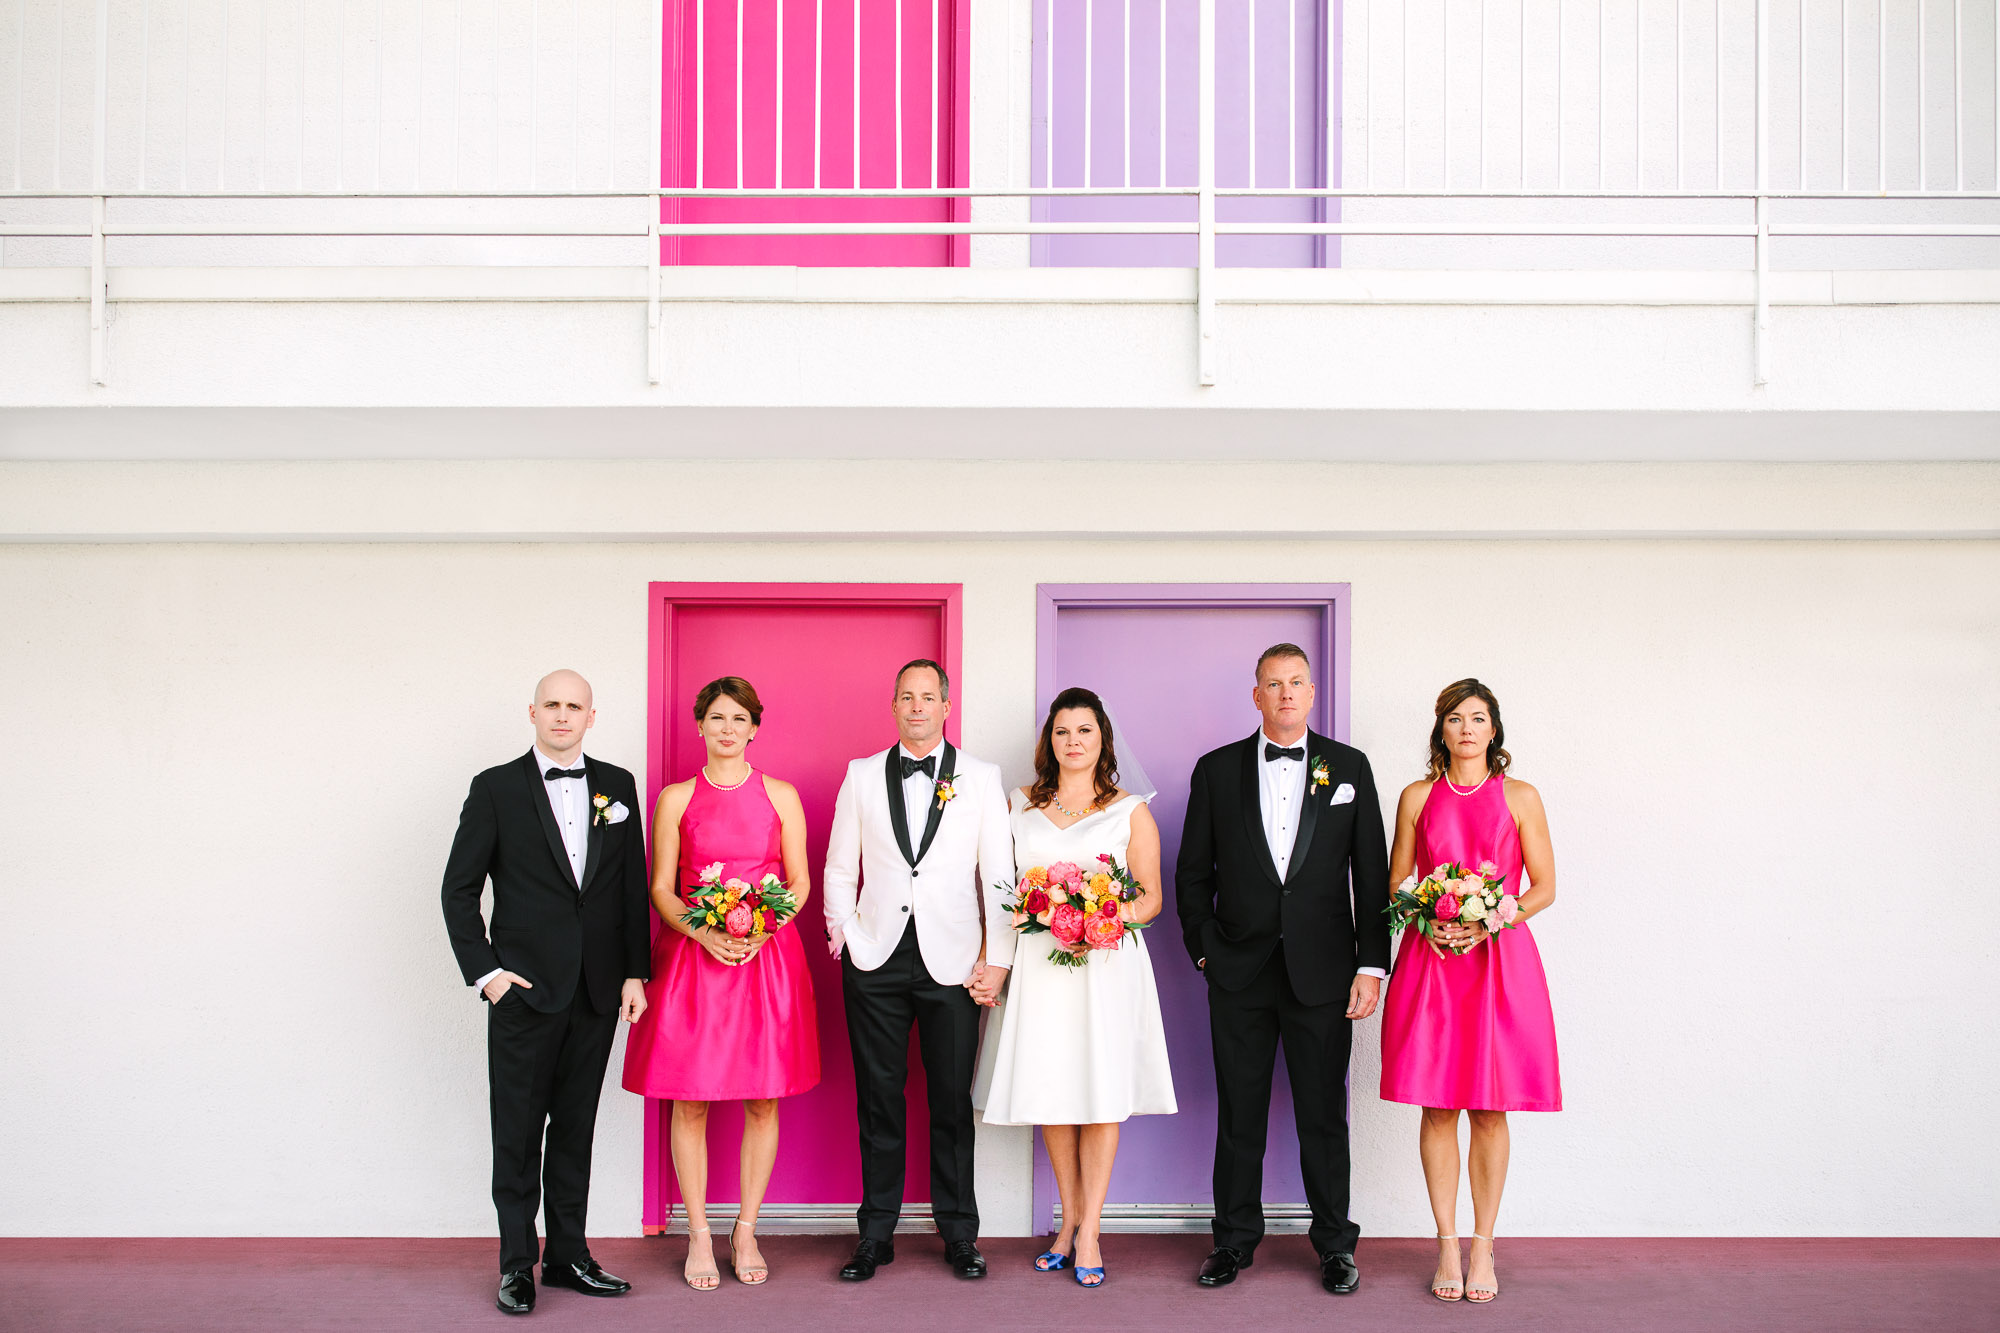 Colorful but serious wedding party at Saguaro Palm Springs www.marycostaweddings.com